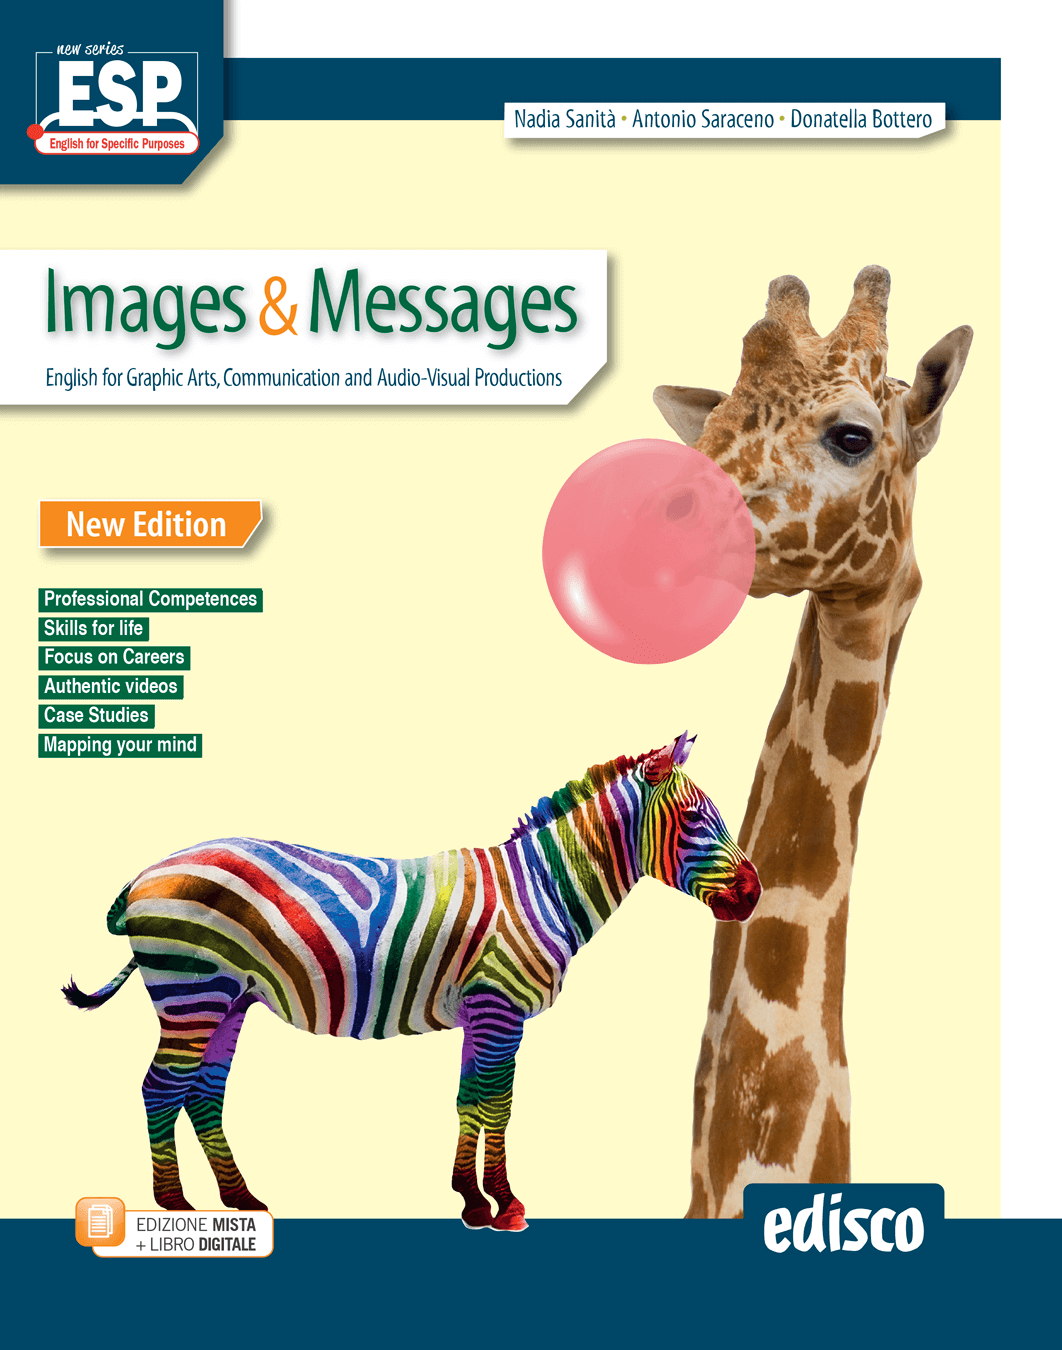 Images & Messages, new edition